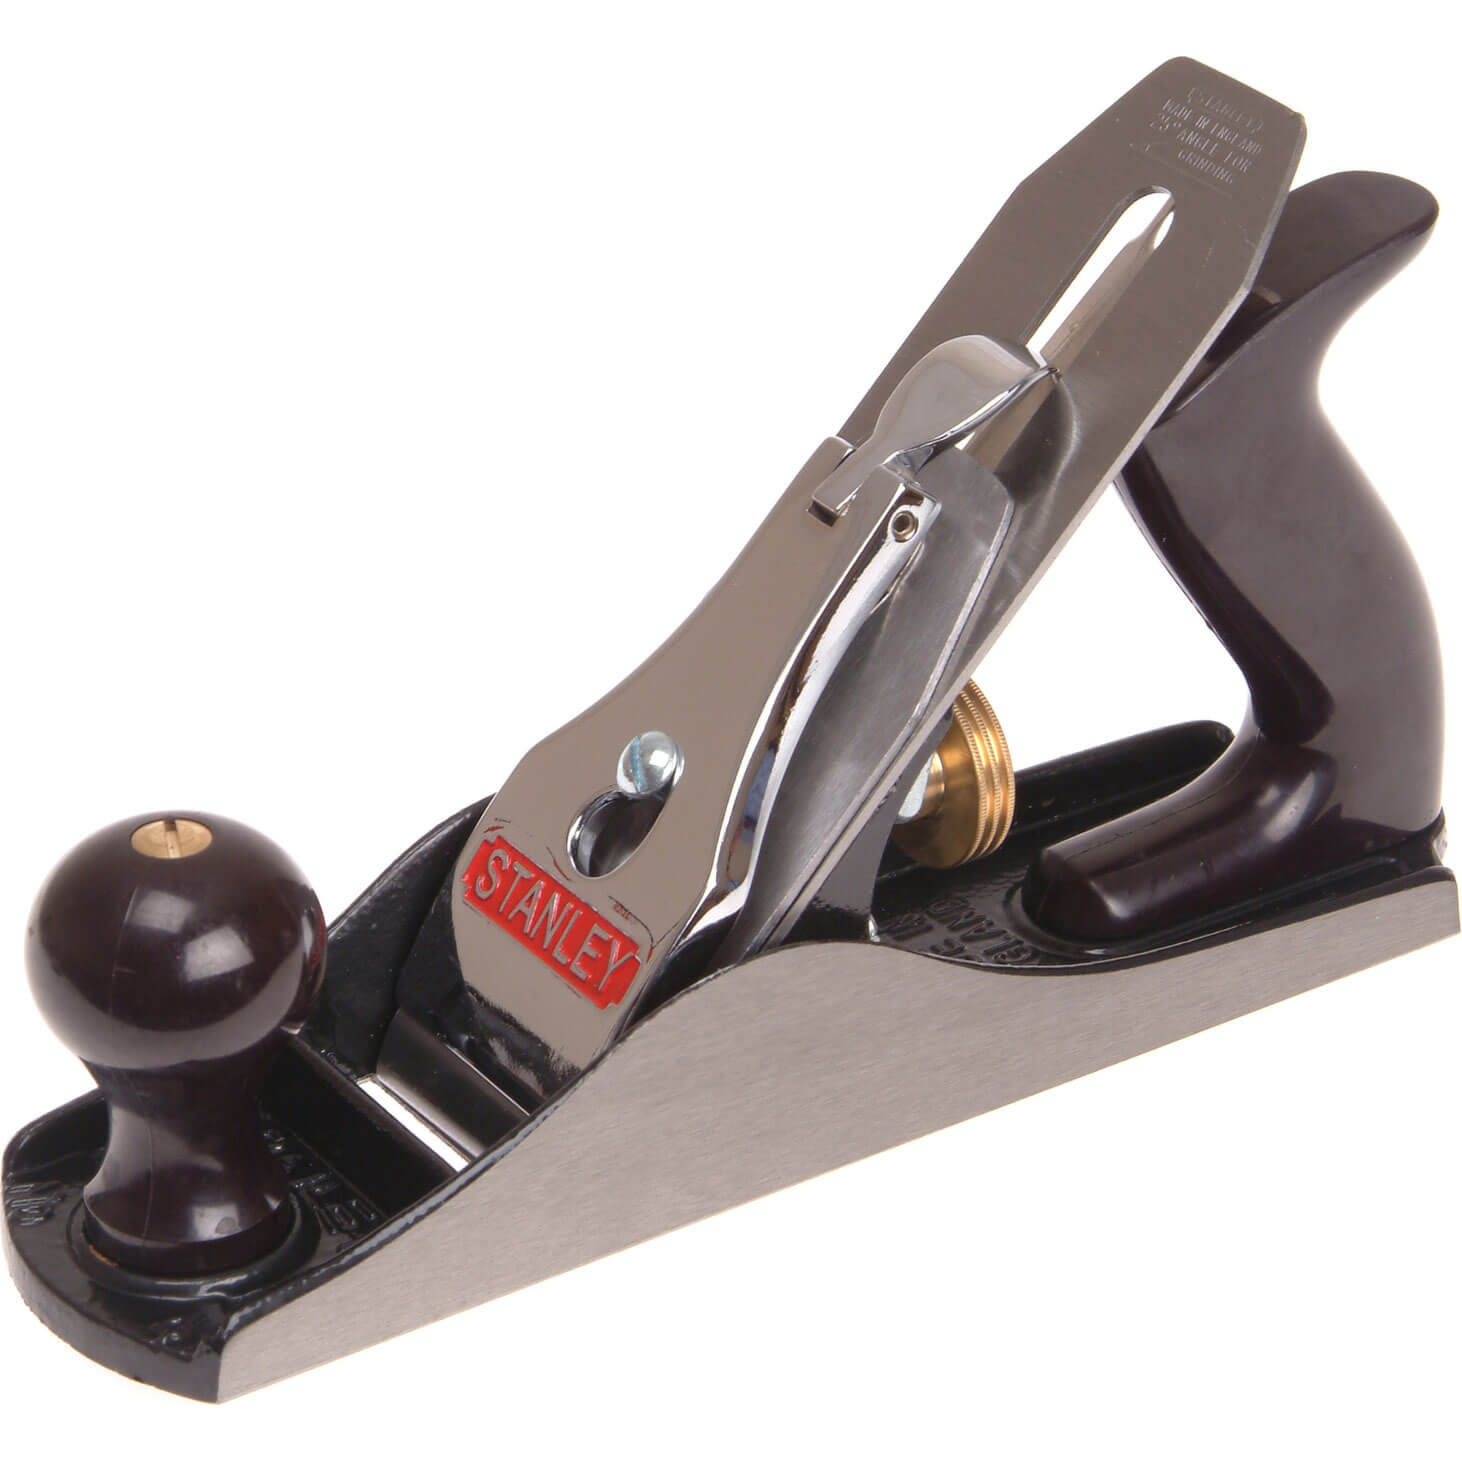 Photo of Stanley No 4 Smoothing Plane